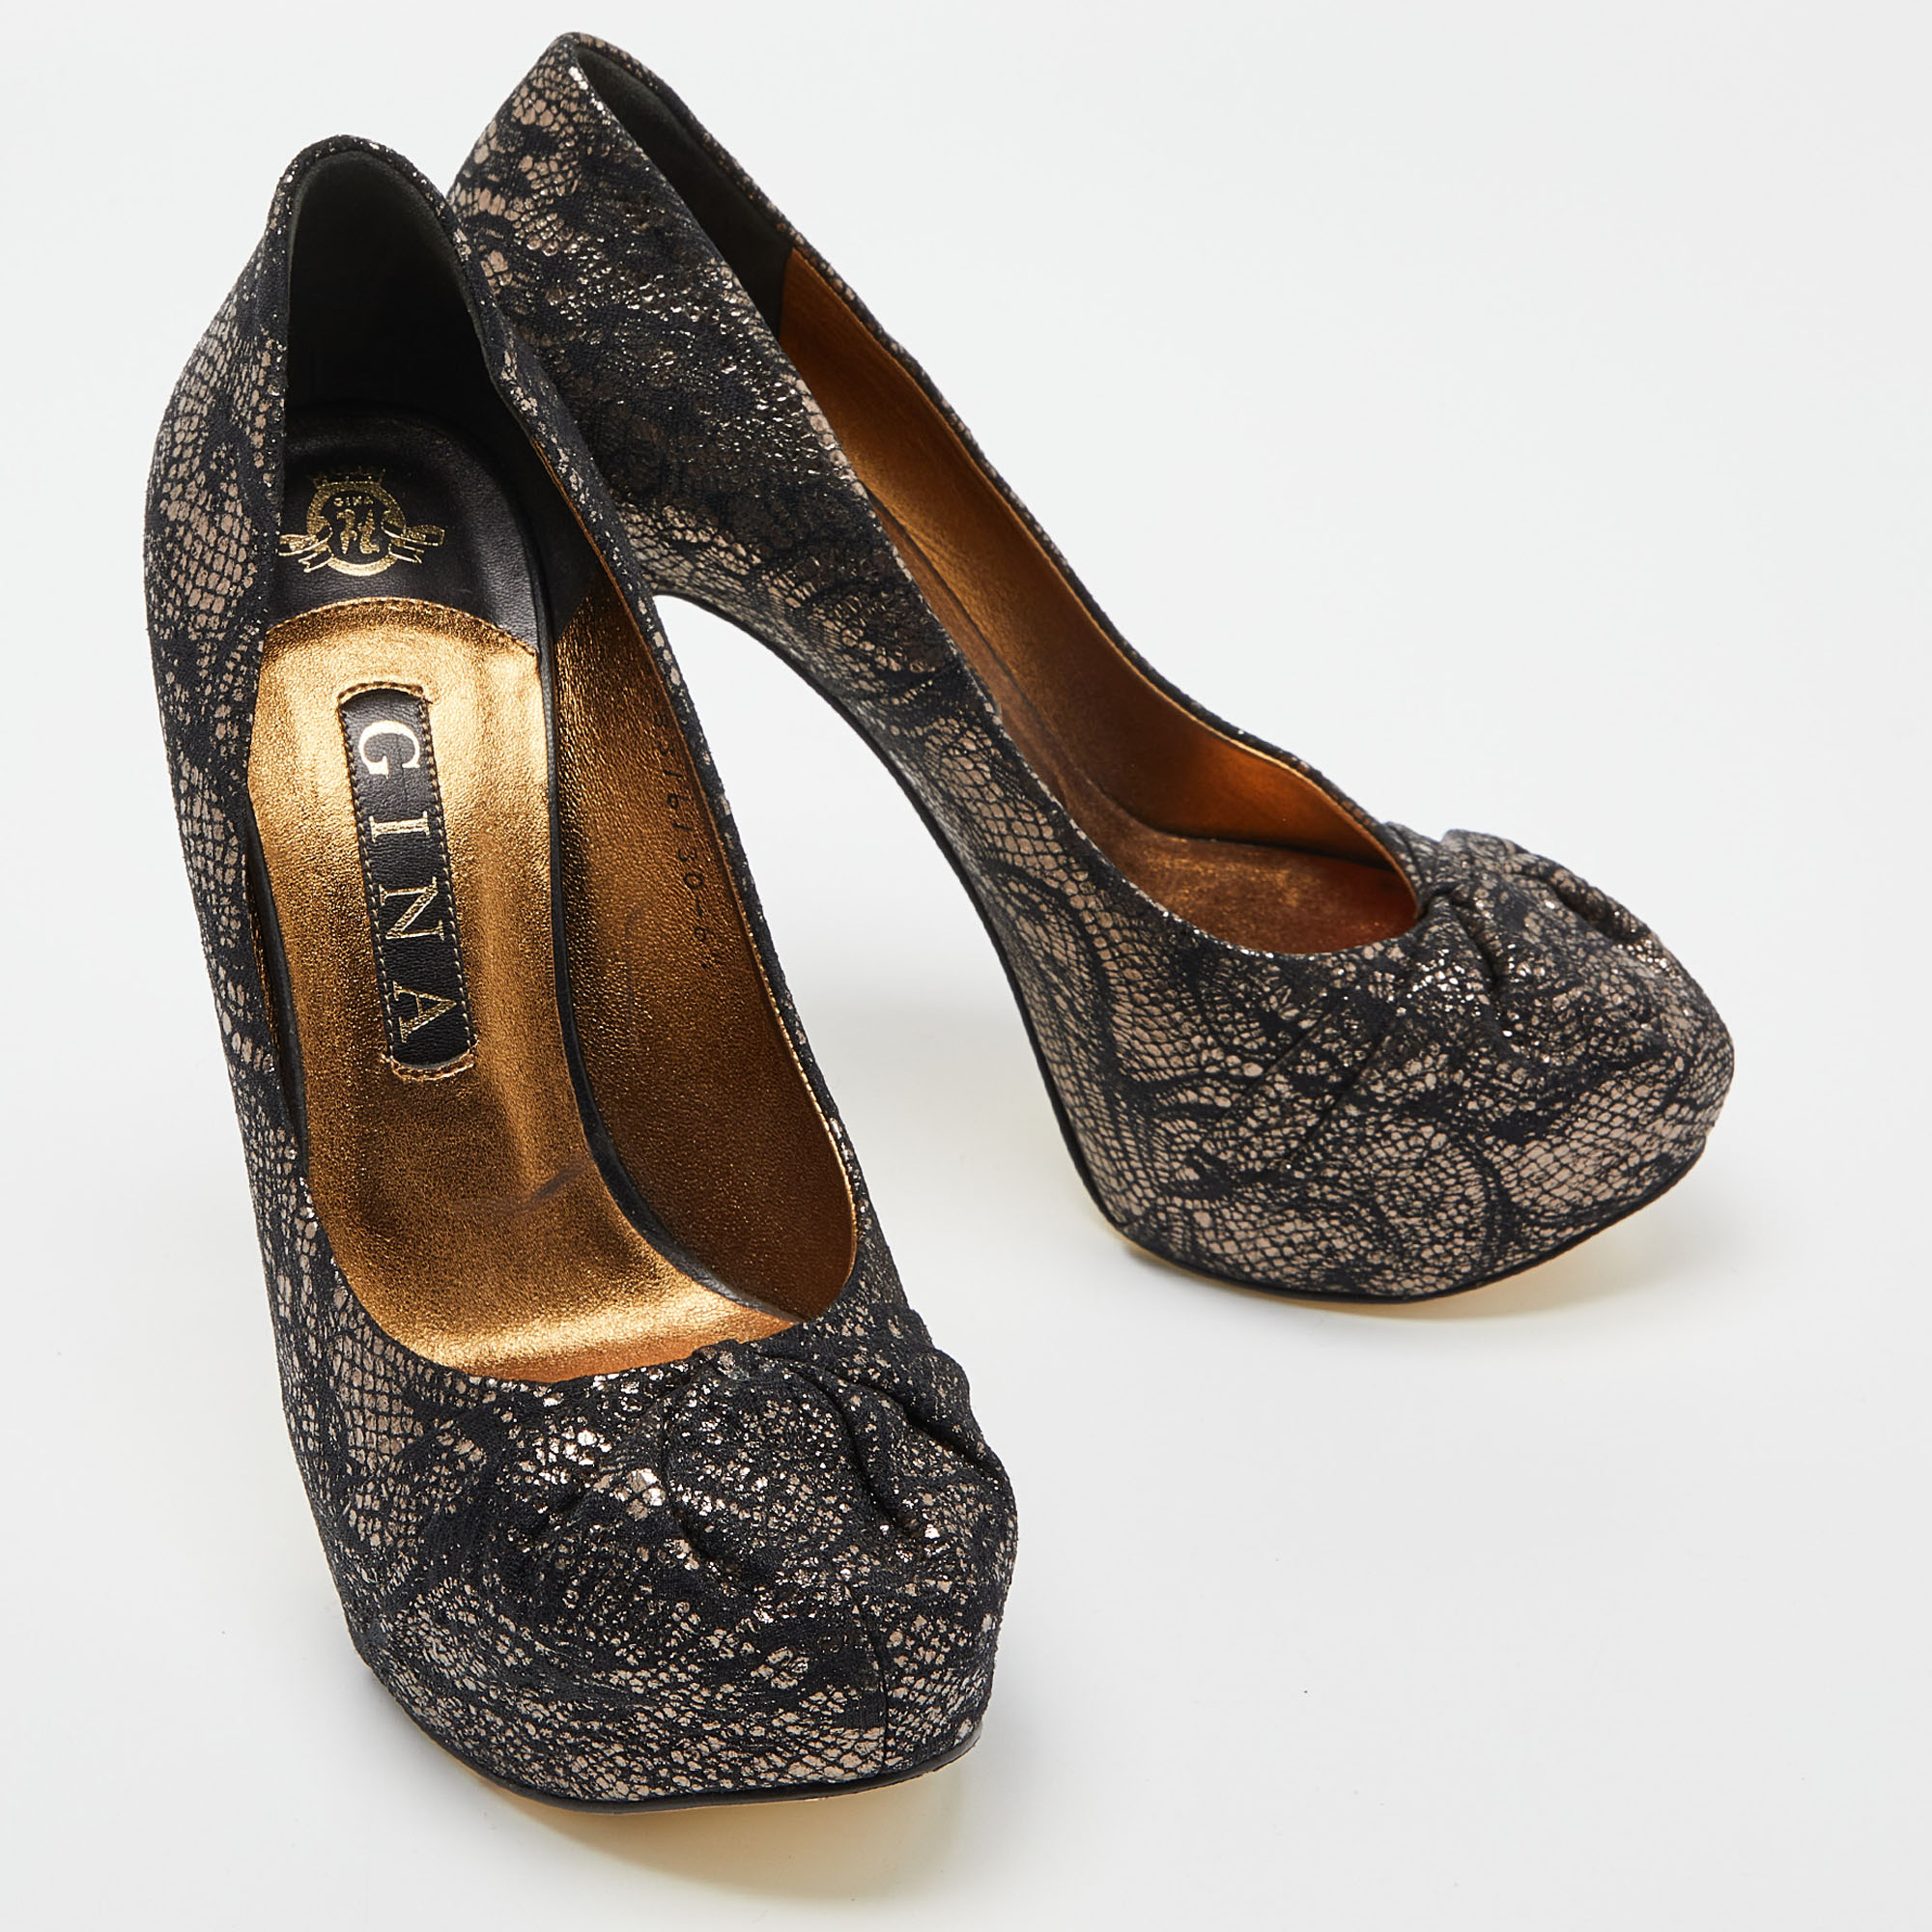 Gina Black/Gold Lace And Leather Platform Pumps Size 39.5